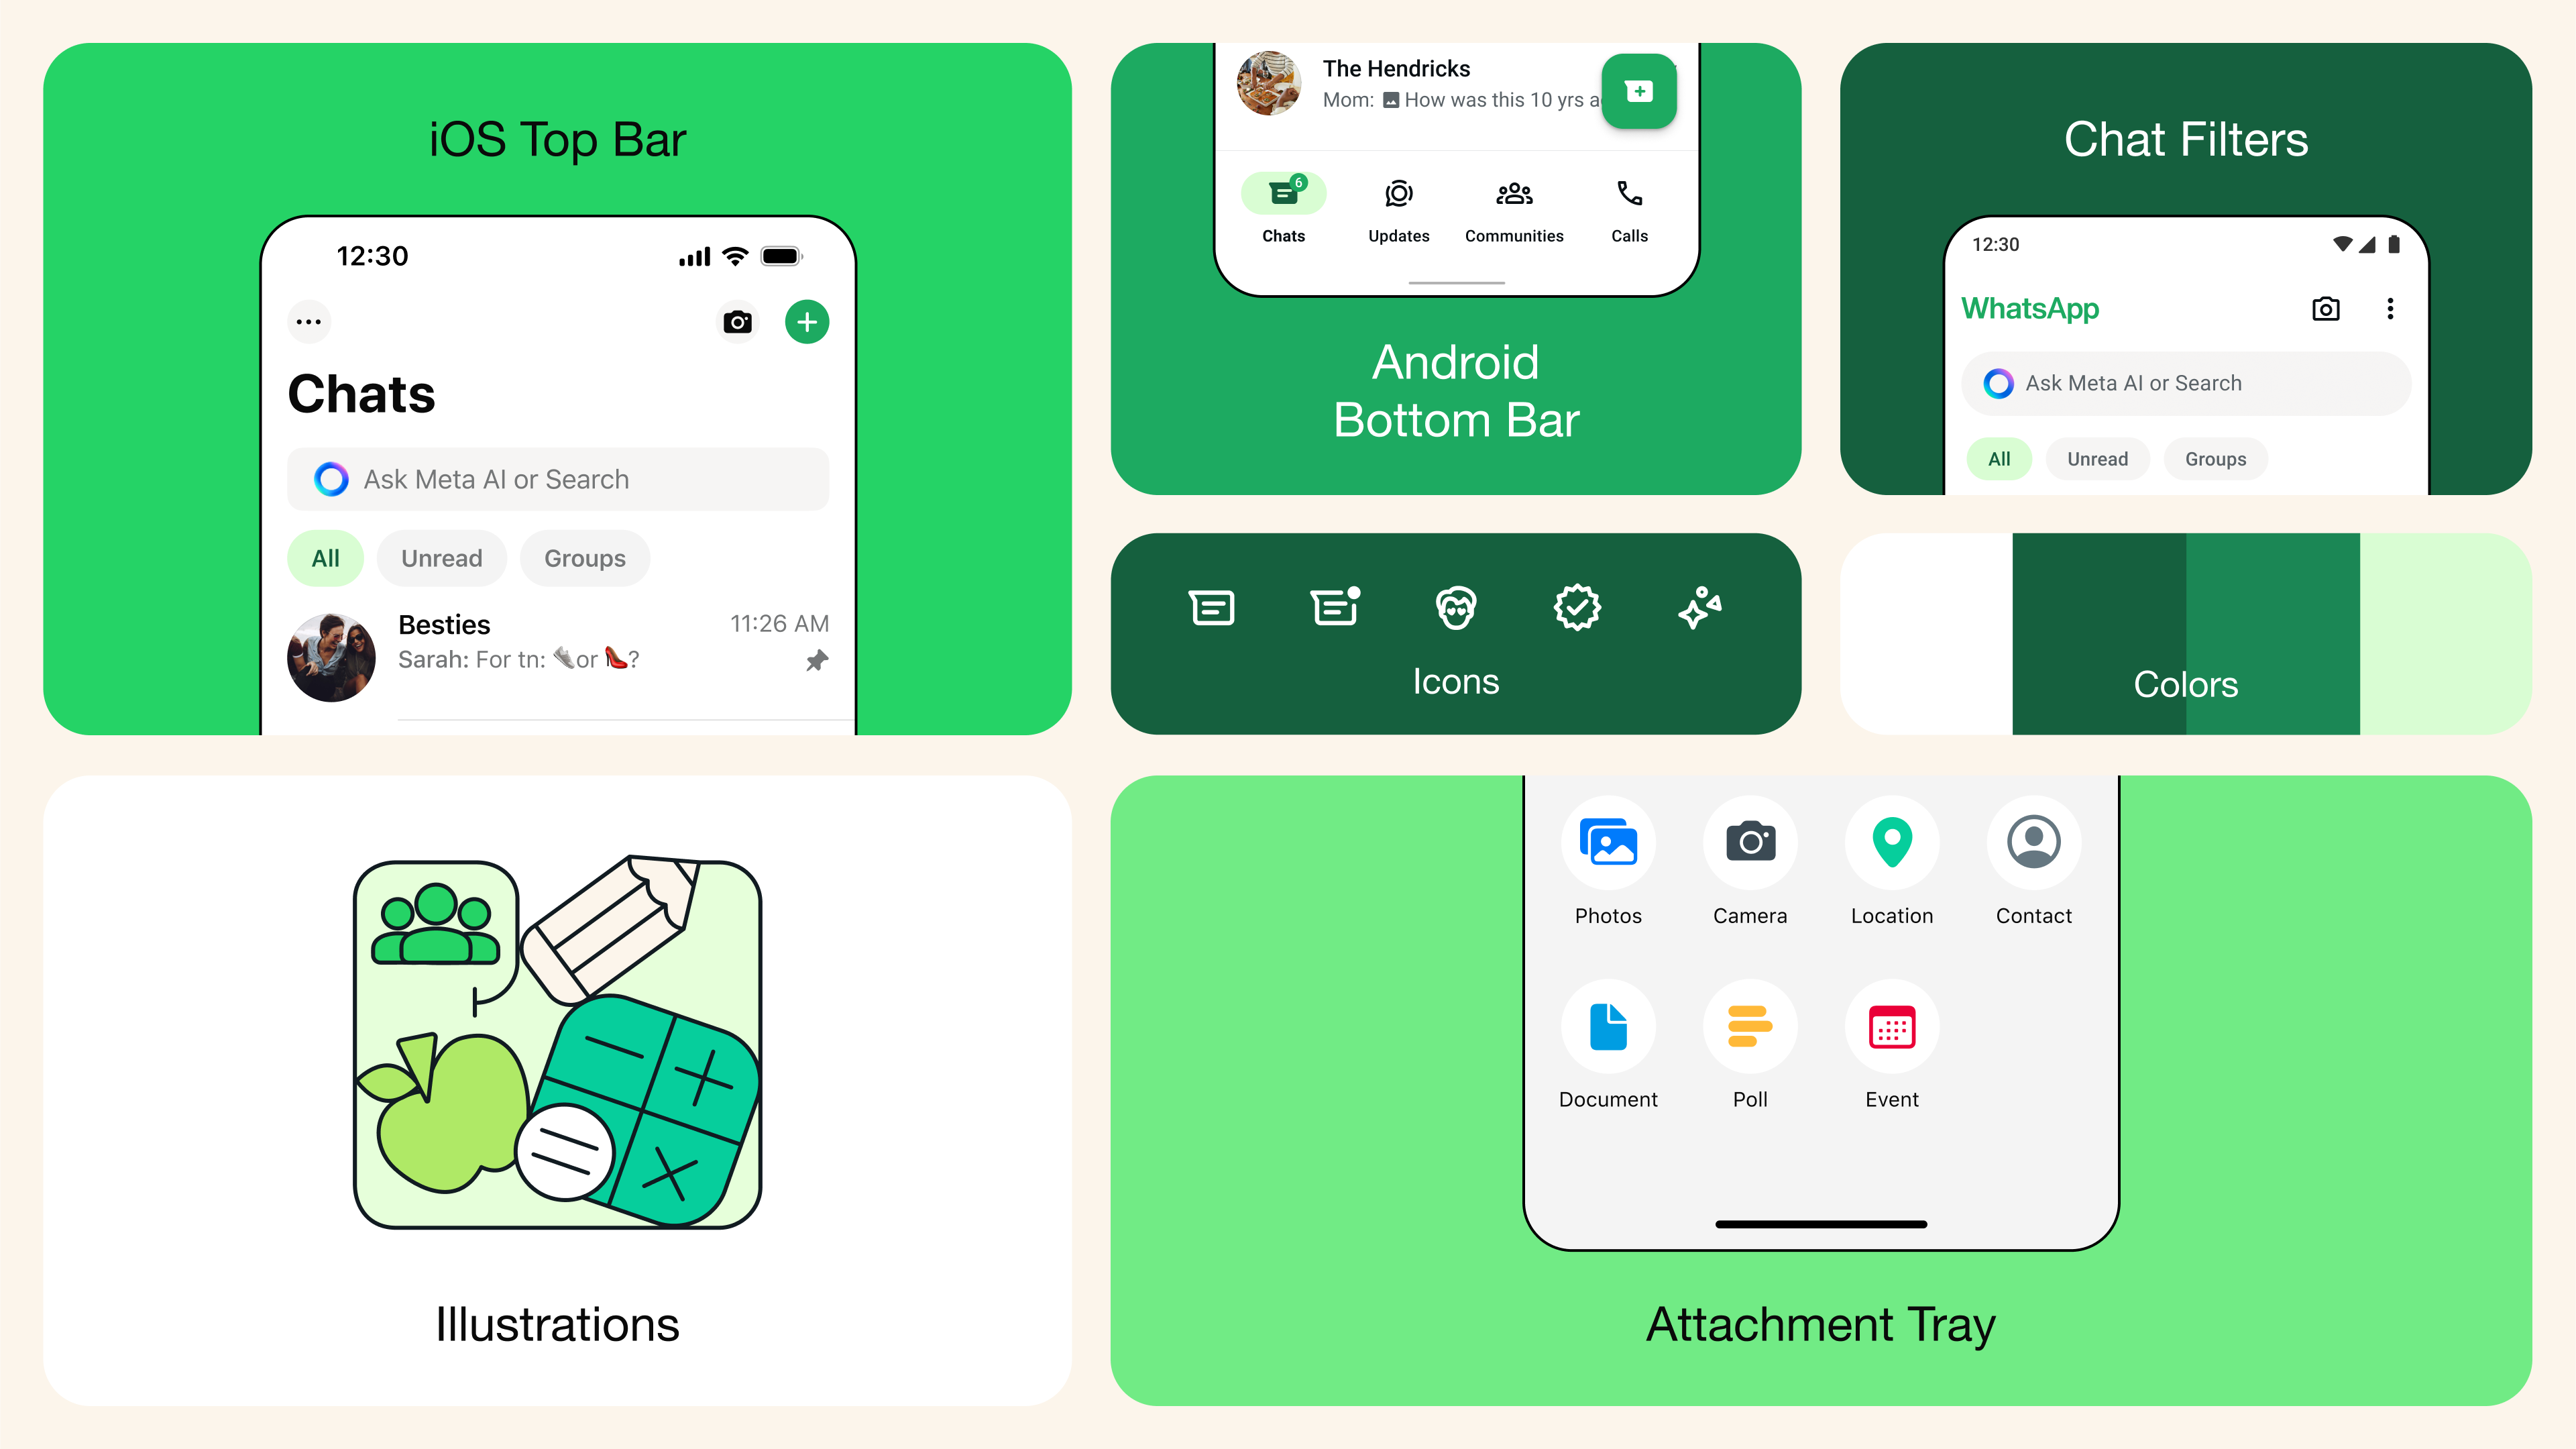 WhatsApp enhances its iconic green colour throughout the app's interface